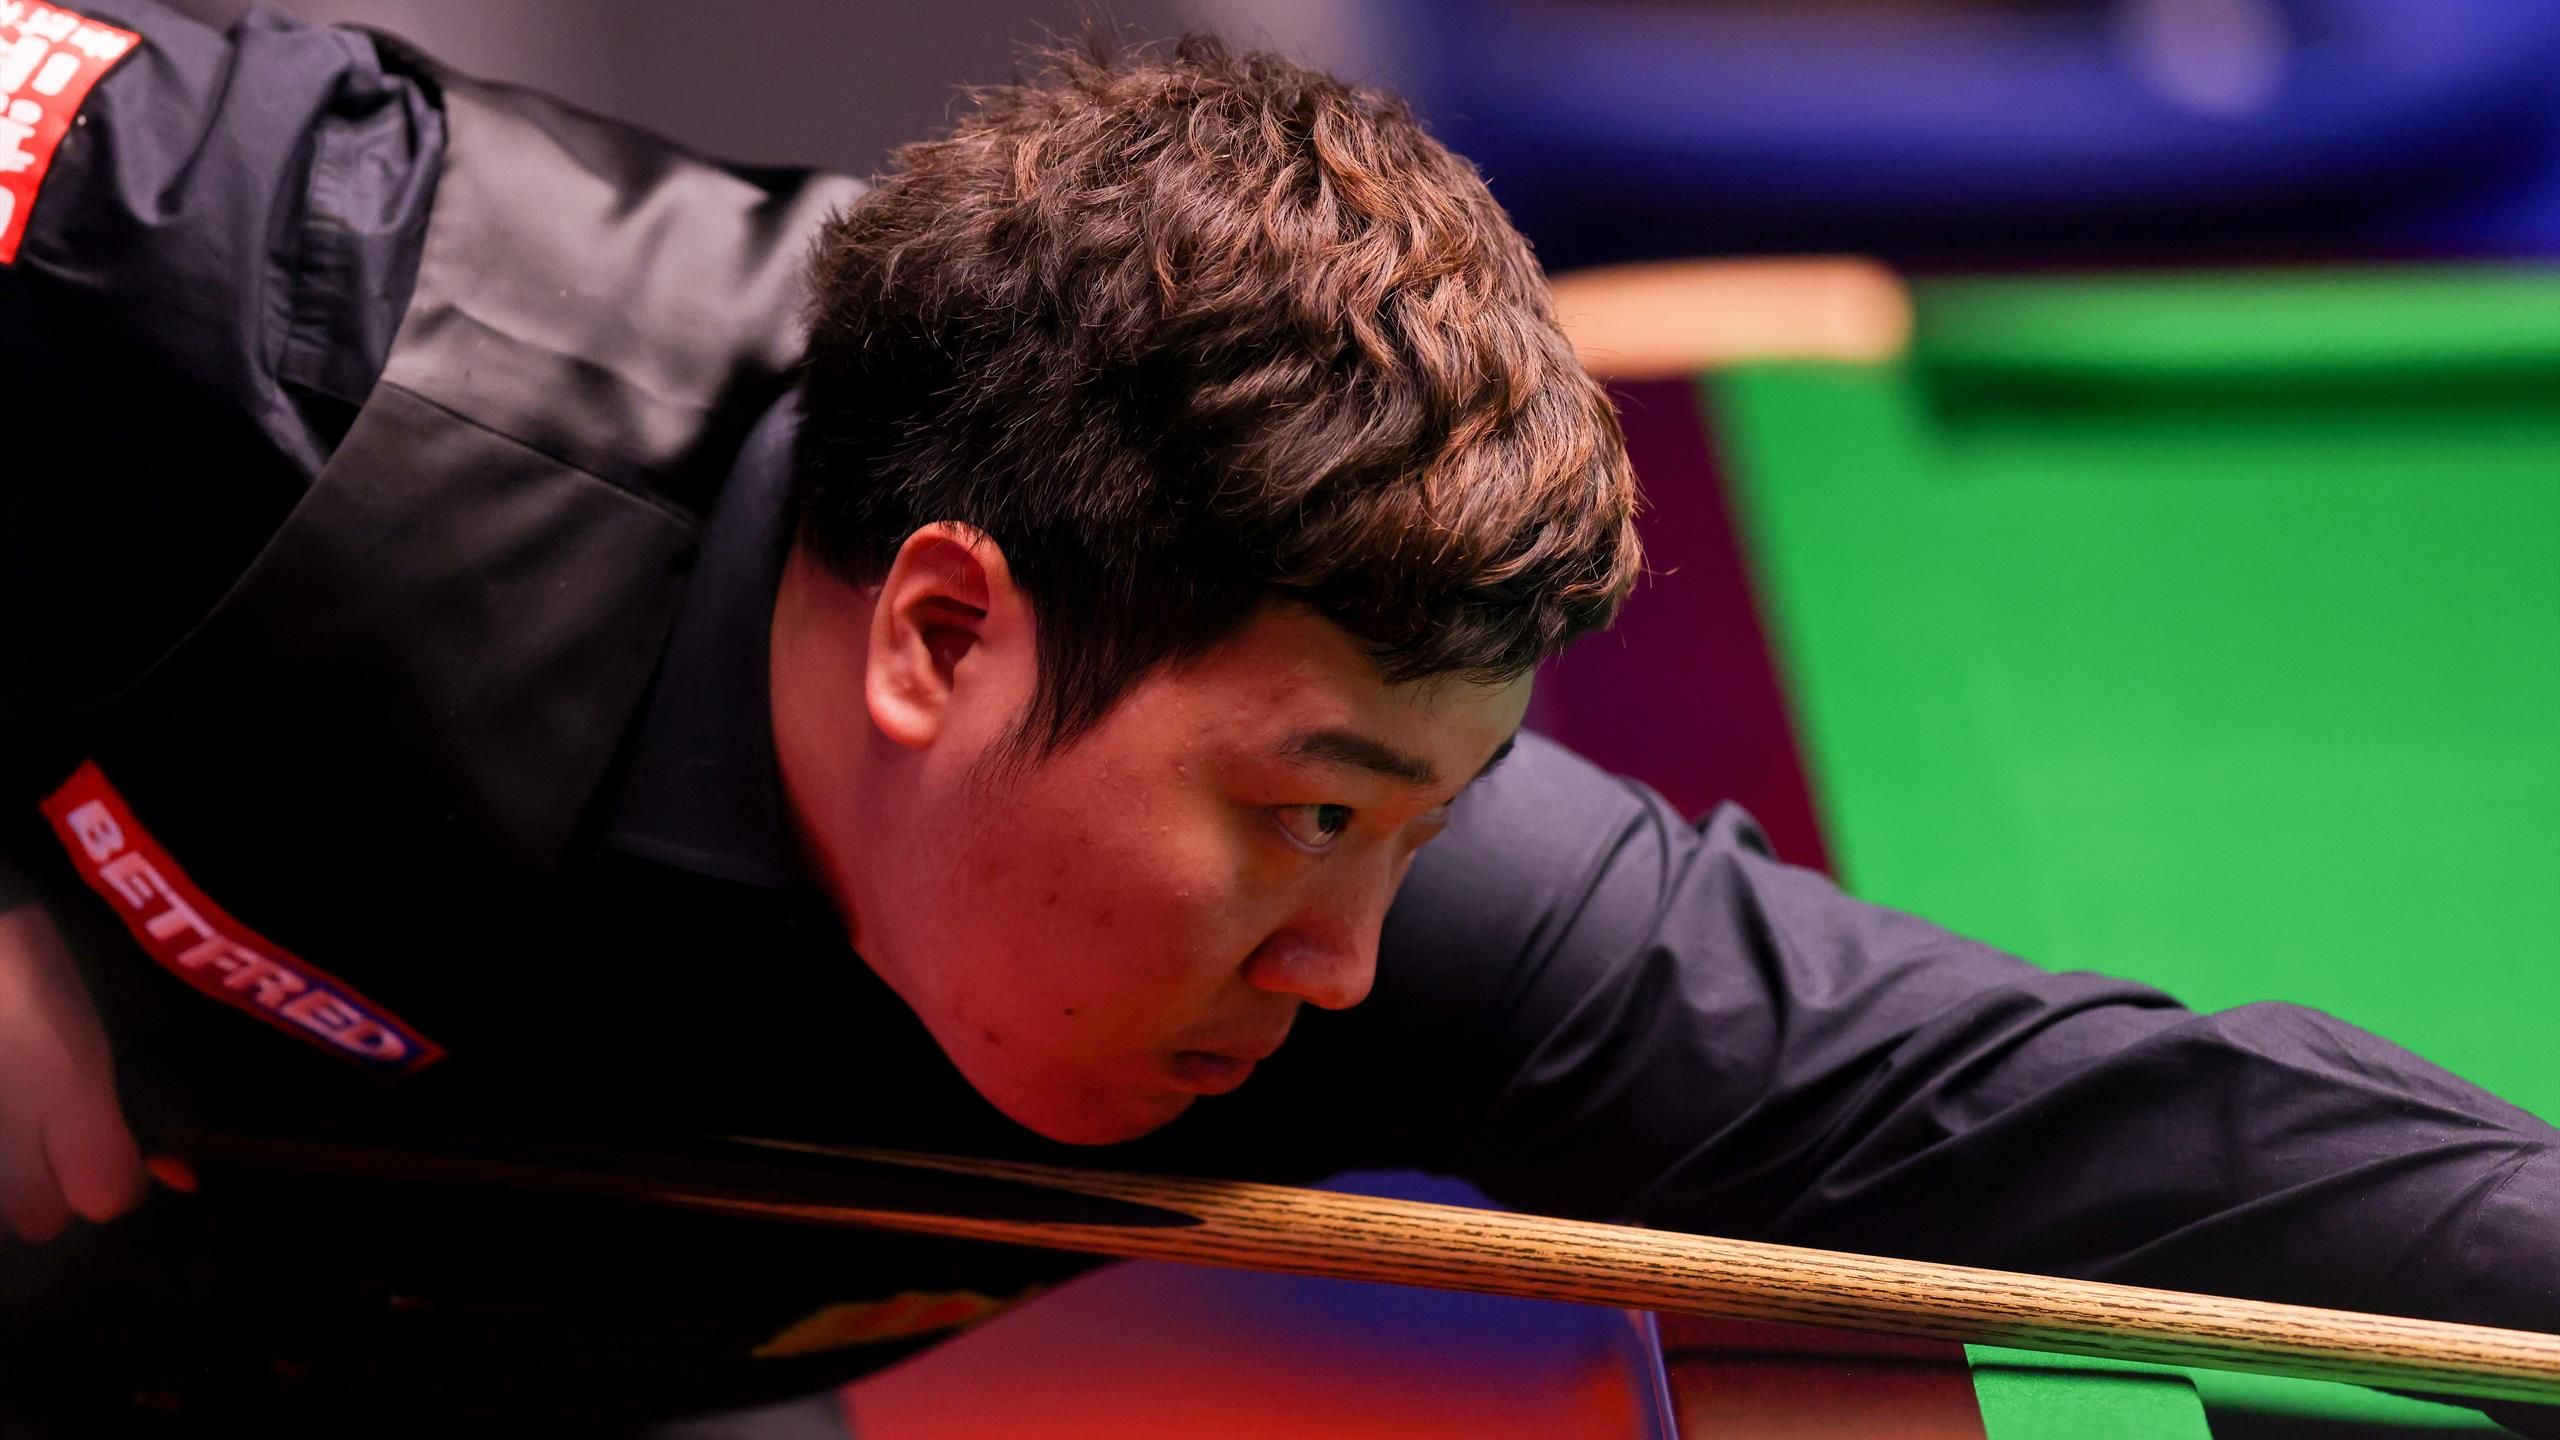 Yan Bingtao at his best to lead reigning champion Mark Selby ahead of final session at World Championship